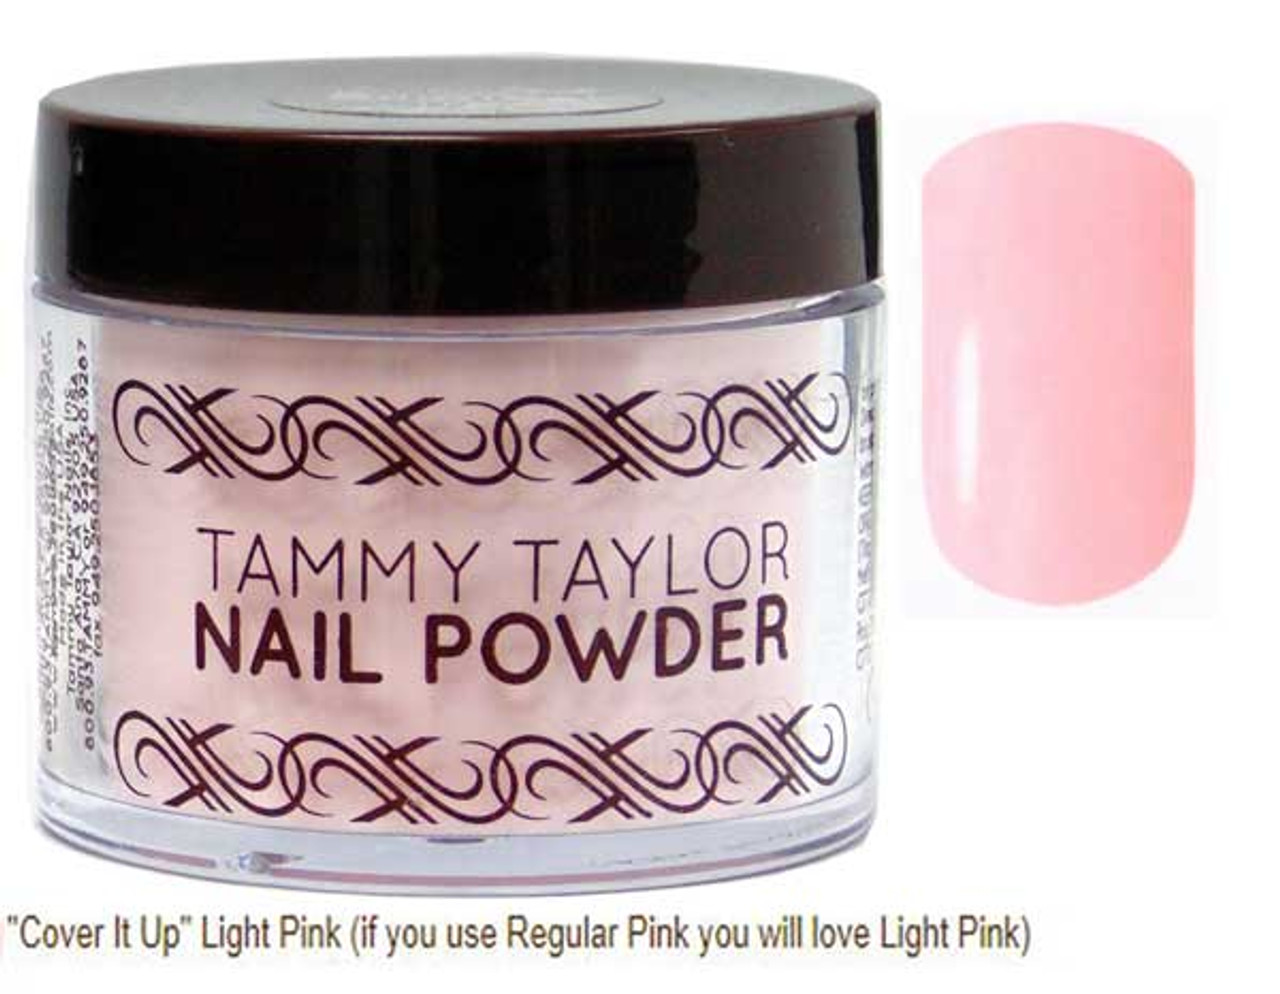 Tammy Taylor Cover It Up Nail Powder Light Pink - 5.25 oz